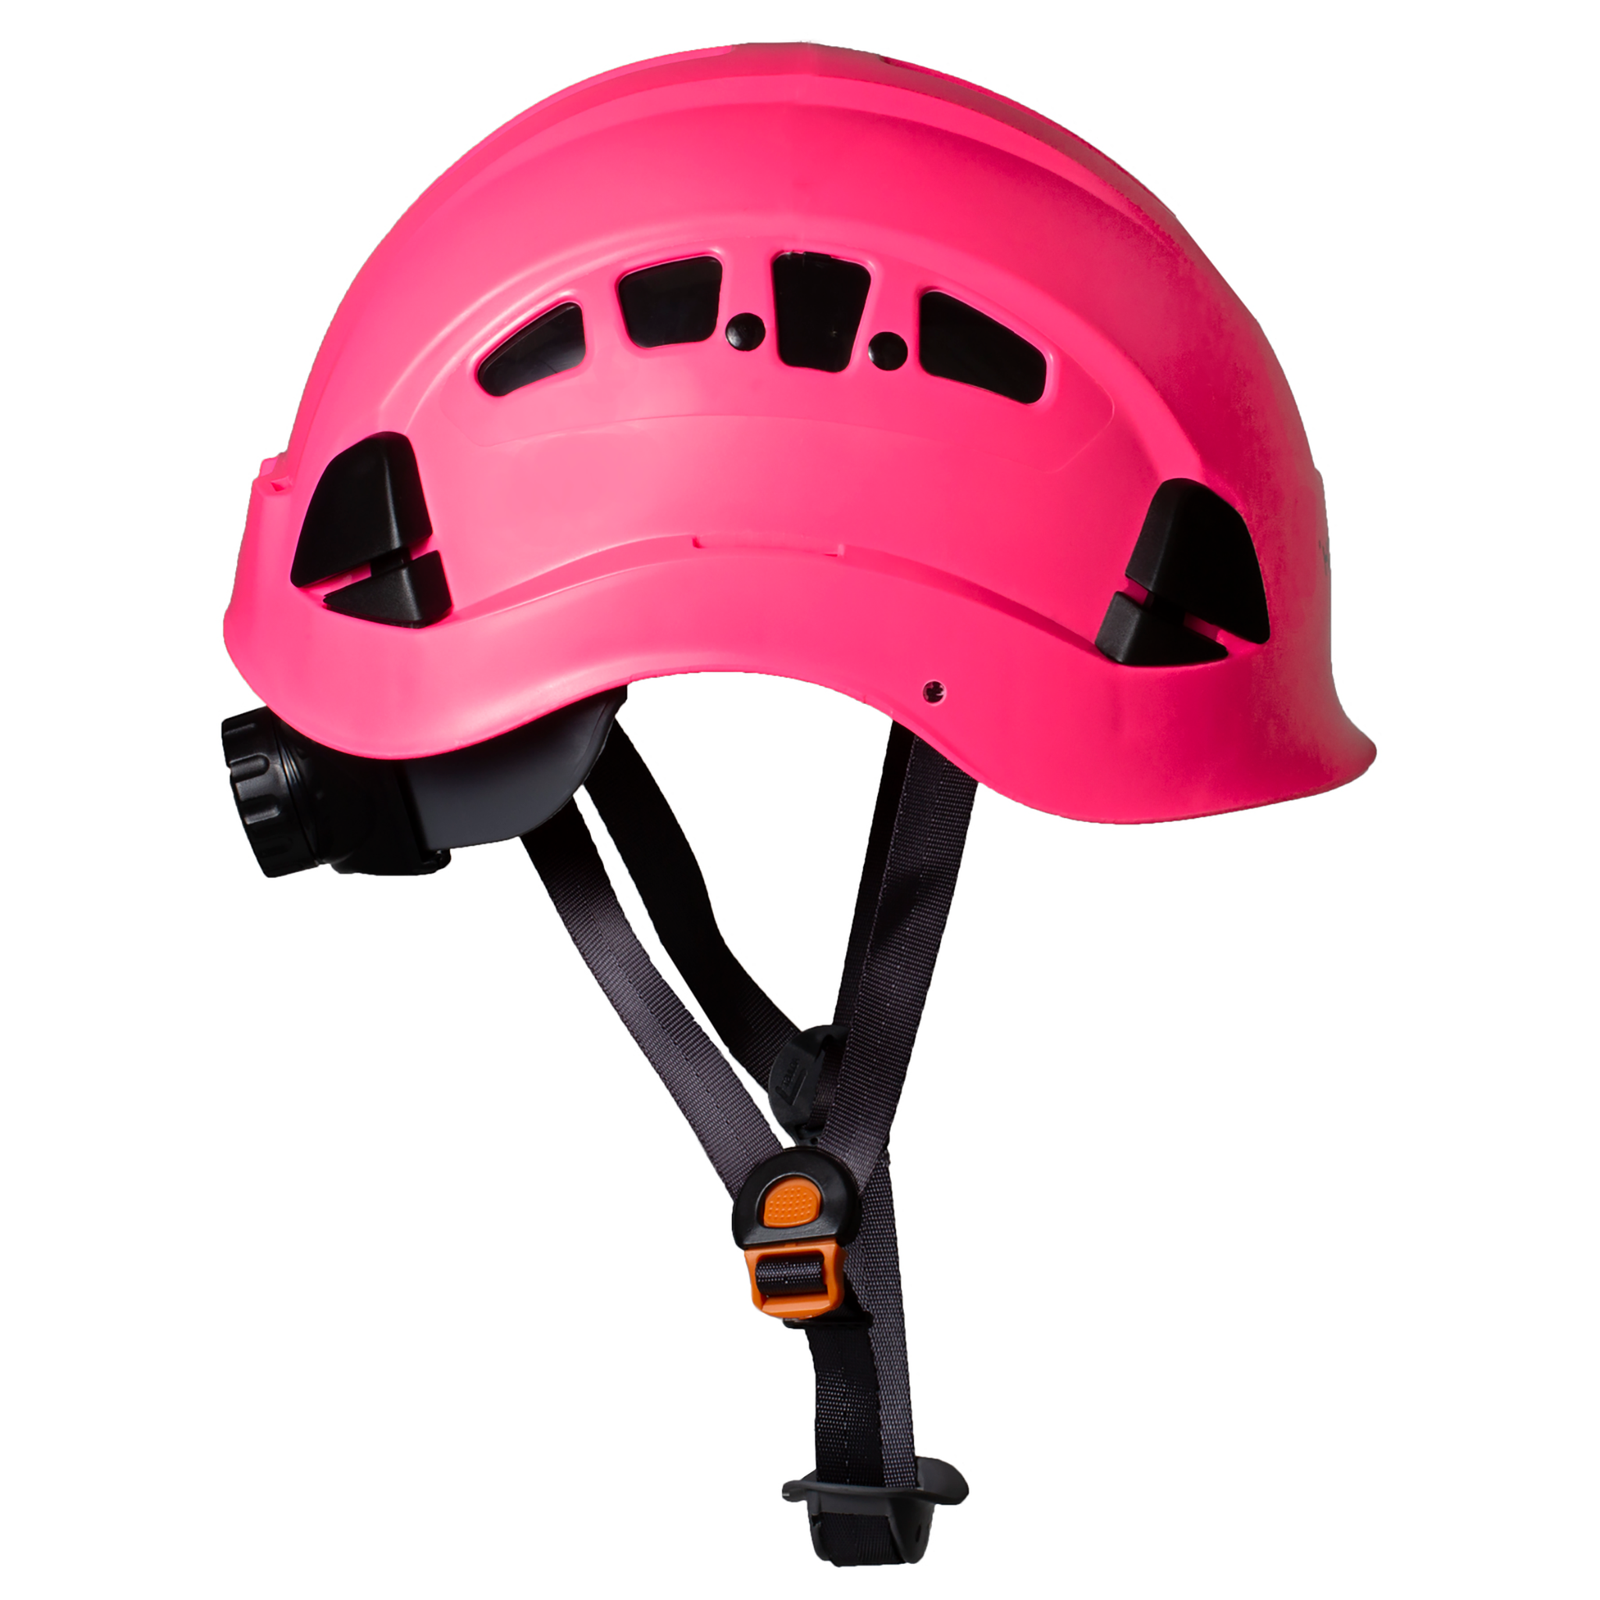 Ventilated rescue ABS hard hat with 6 point suspension, wheel ratchet adjustment and chin strap.